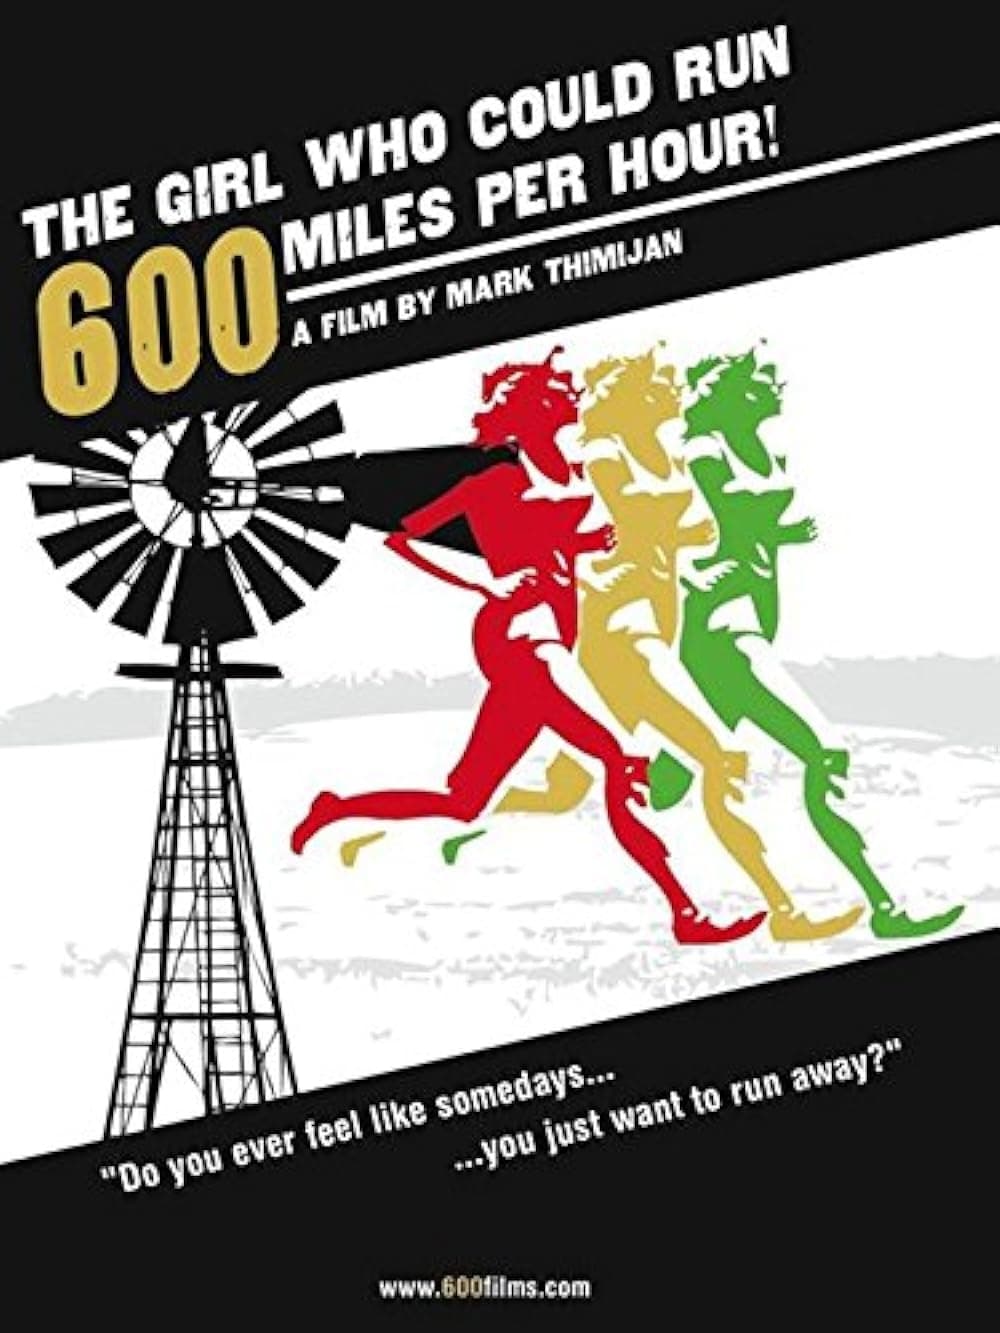 The Girl Who Could Run 600 Miles Per Hour